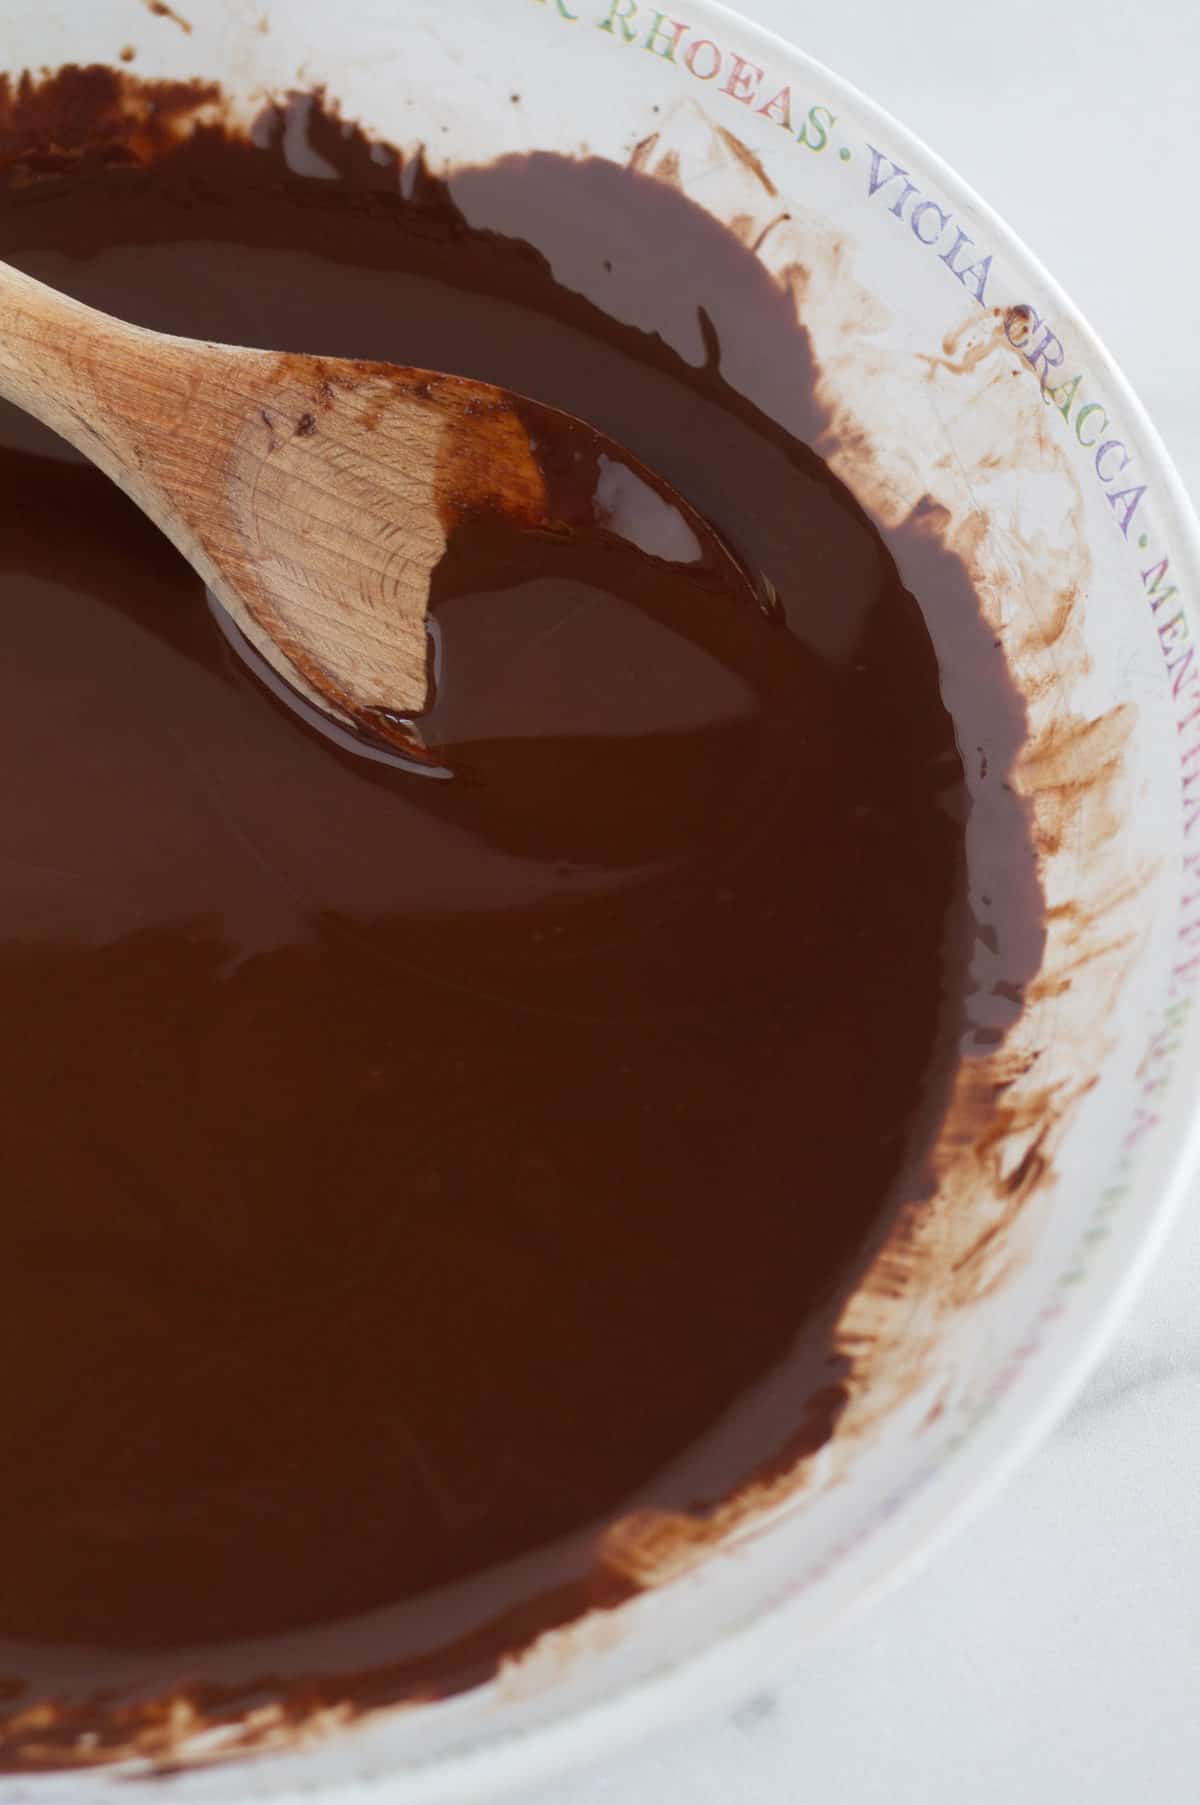 melted chocolate and coconut oil in large bowl